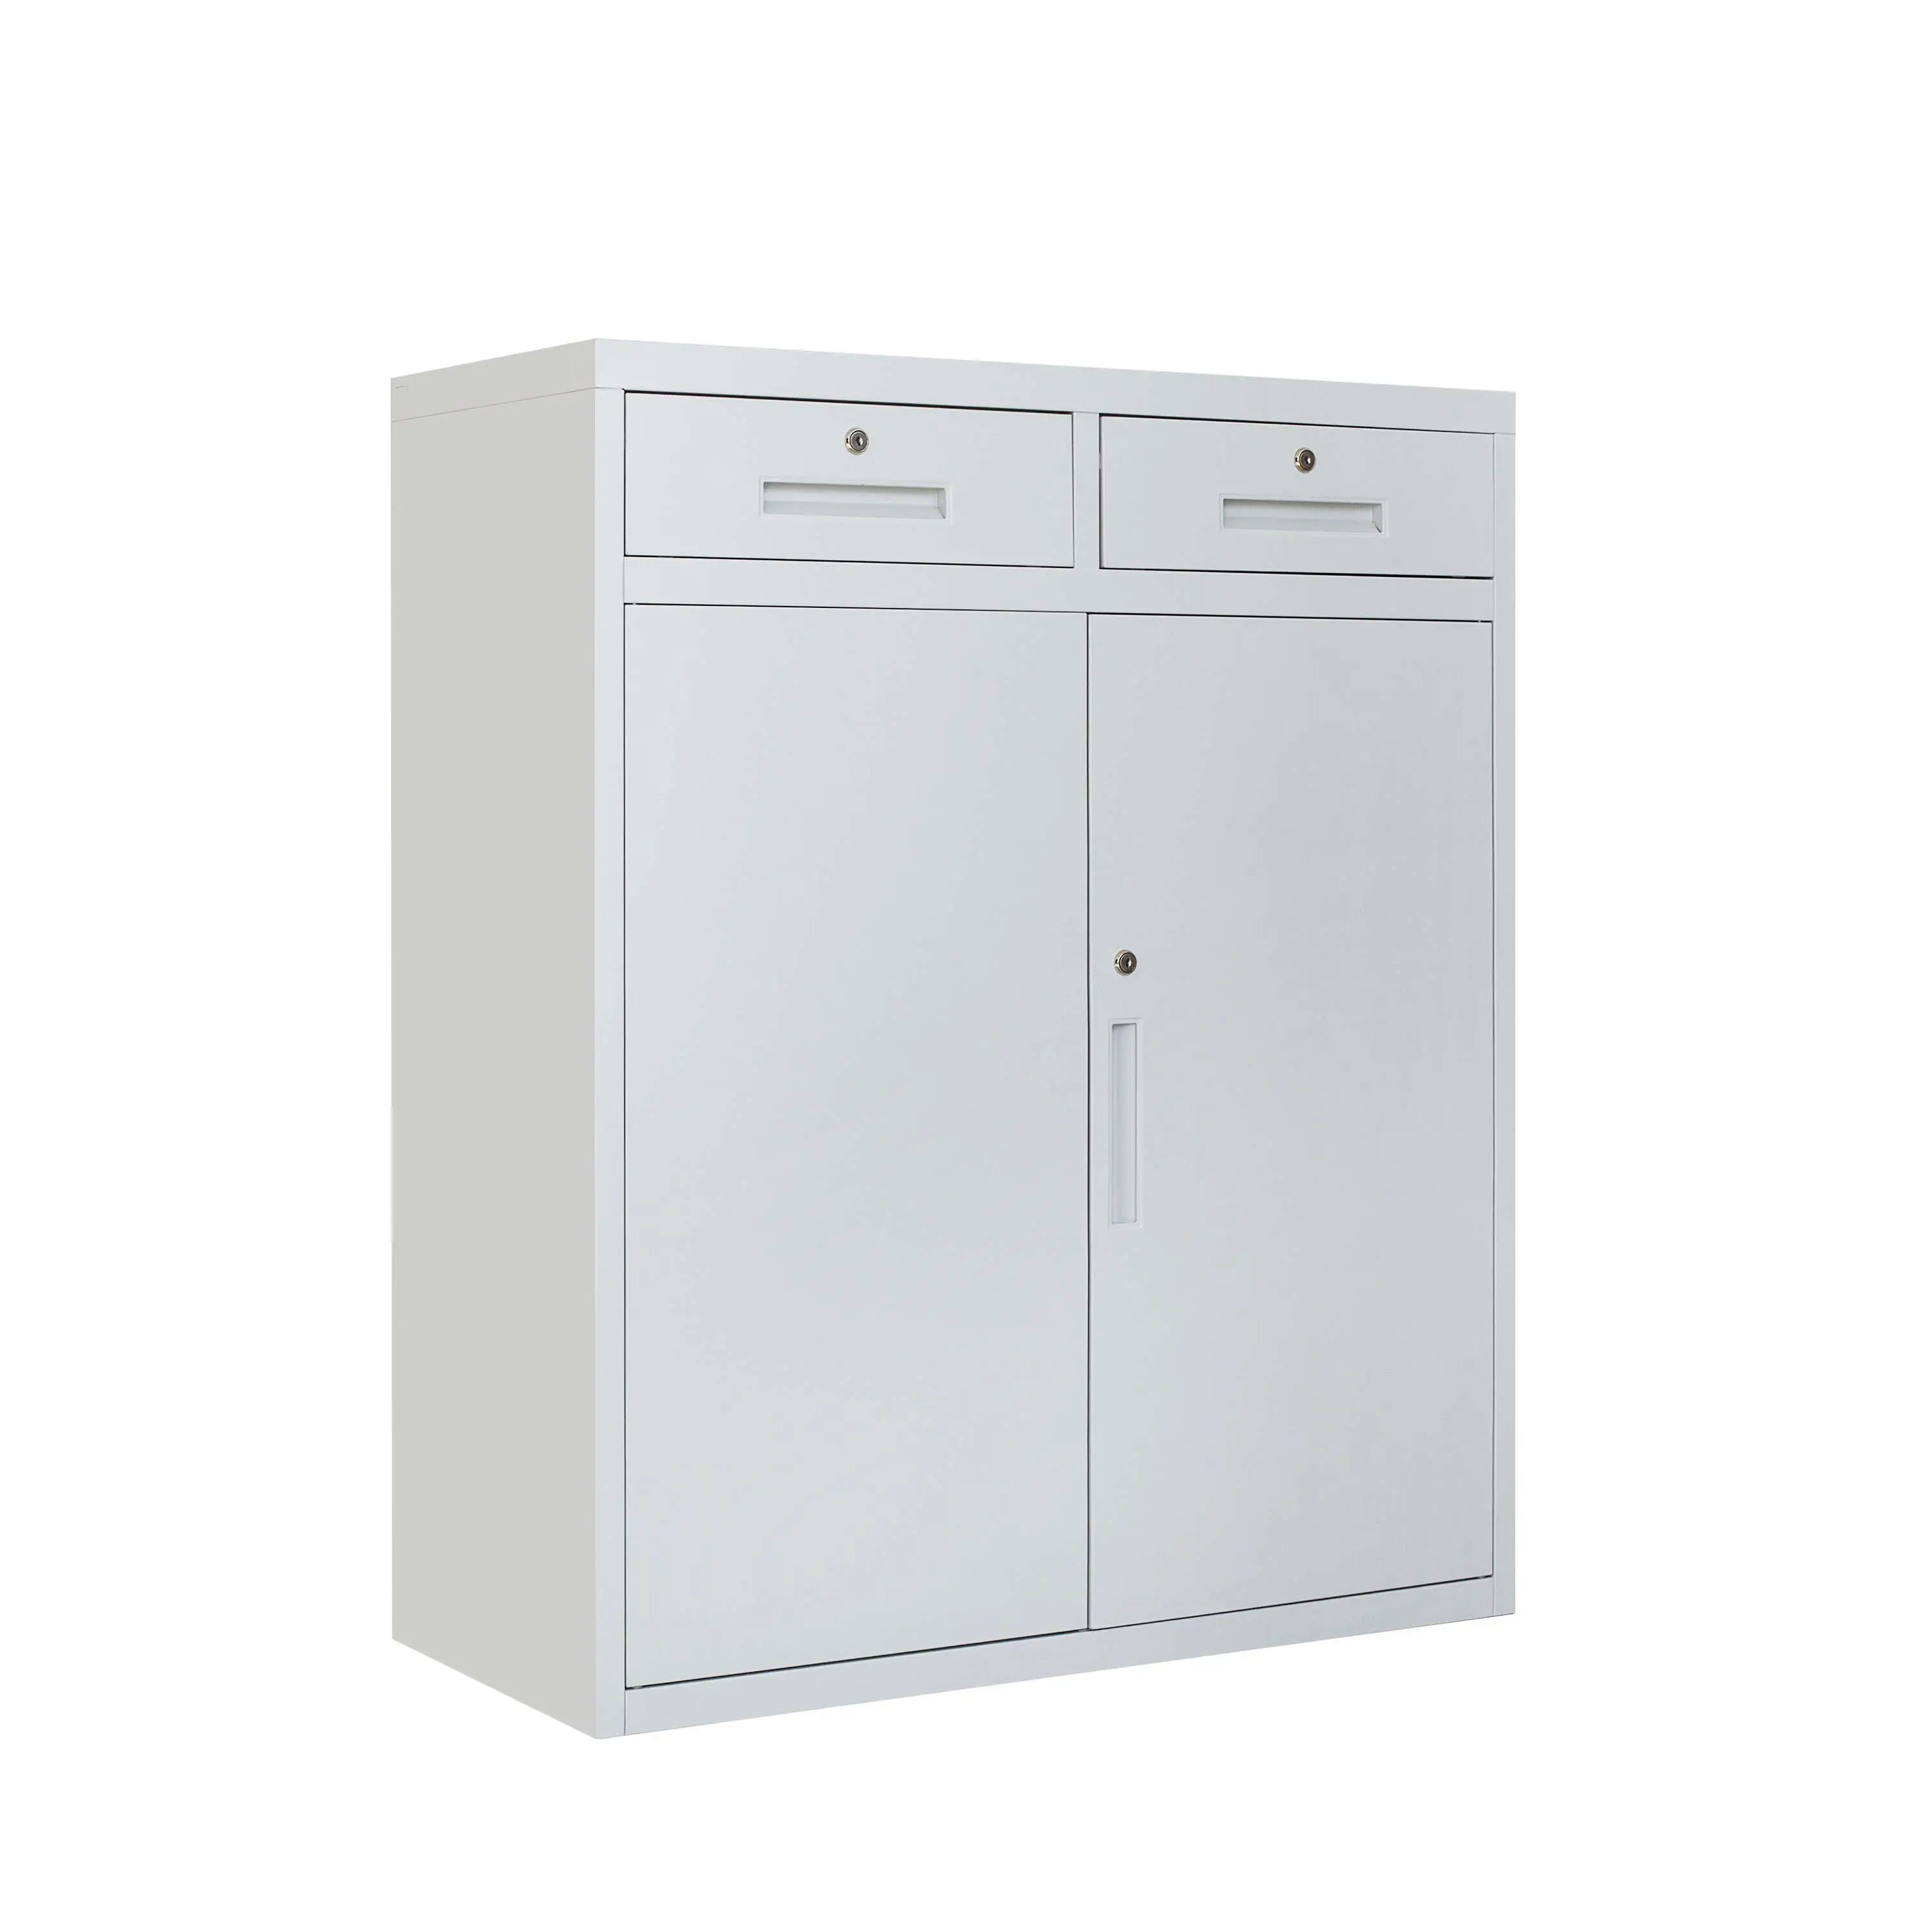 Wholesale factory price customized 2 door metal storage lower steel file Filing cabinet for office home metal furniture